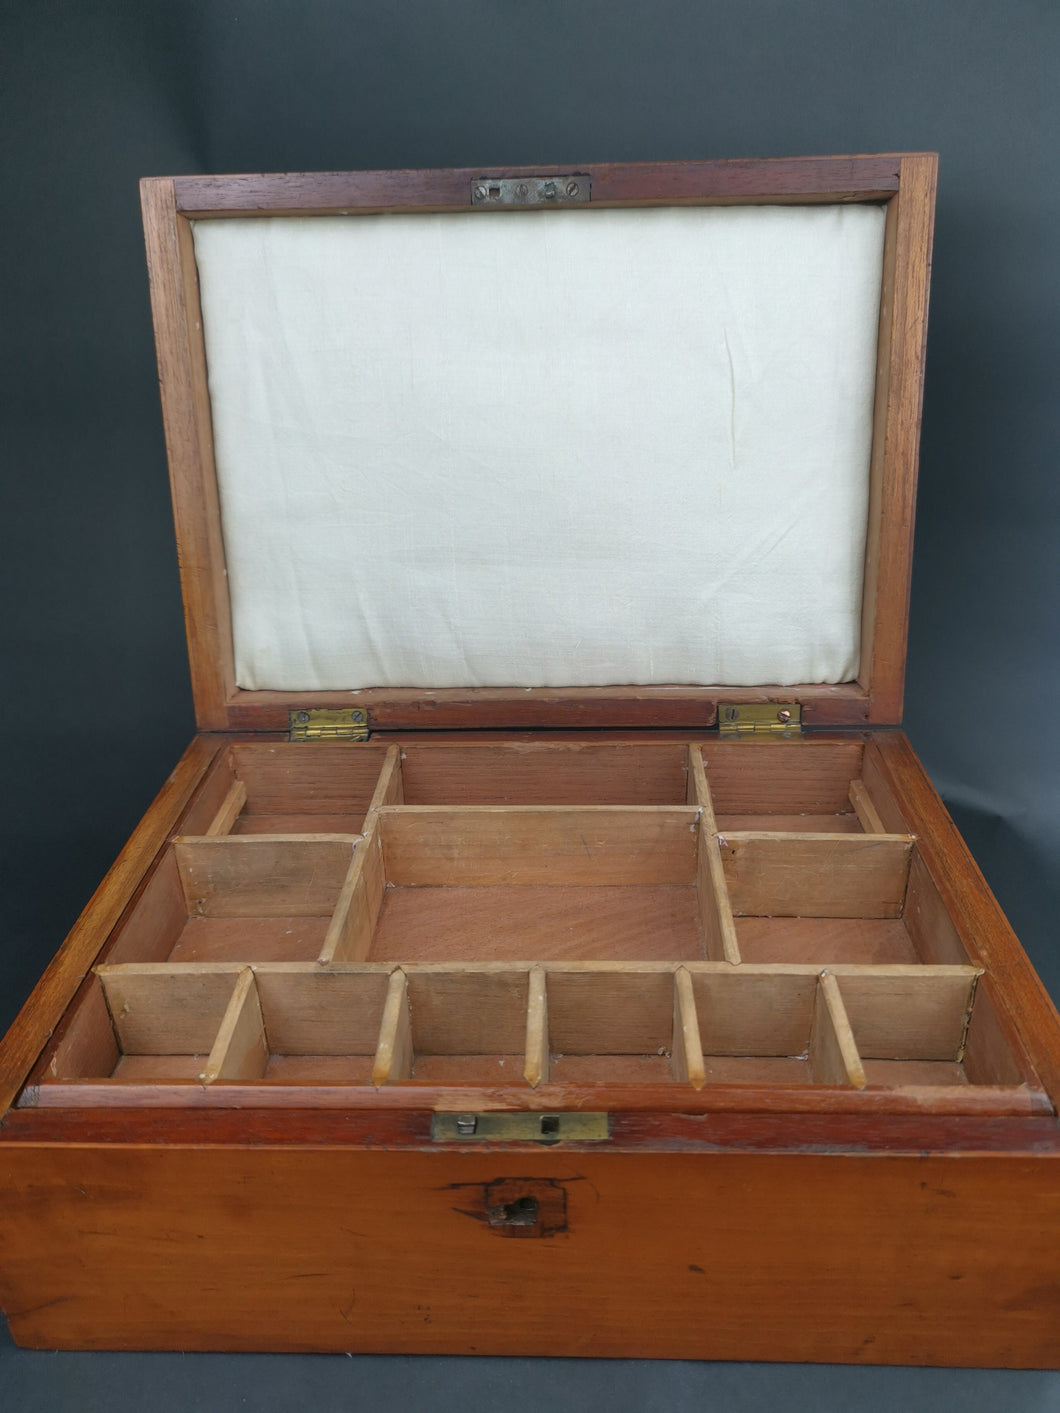 Antique Wooden Jewelry or Sewing Box with Lots of Compartments and Original Key Early 1900's Original